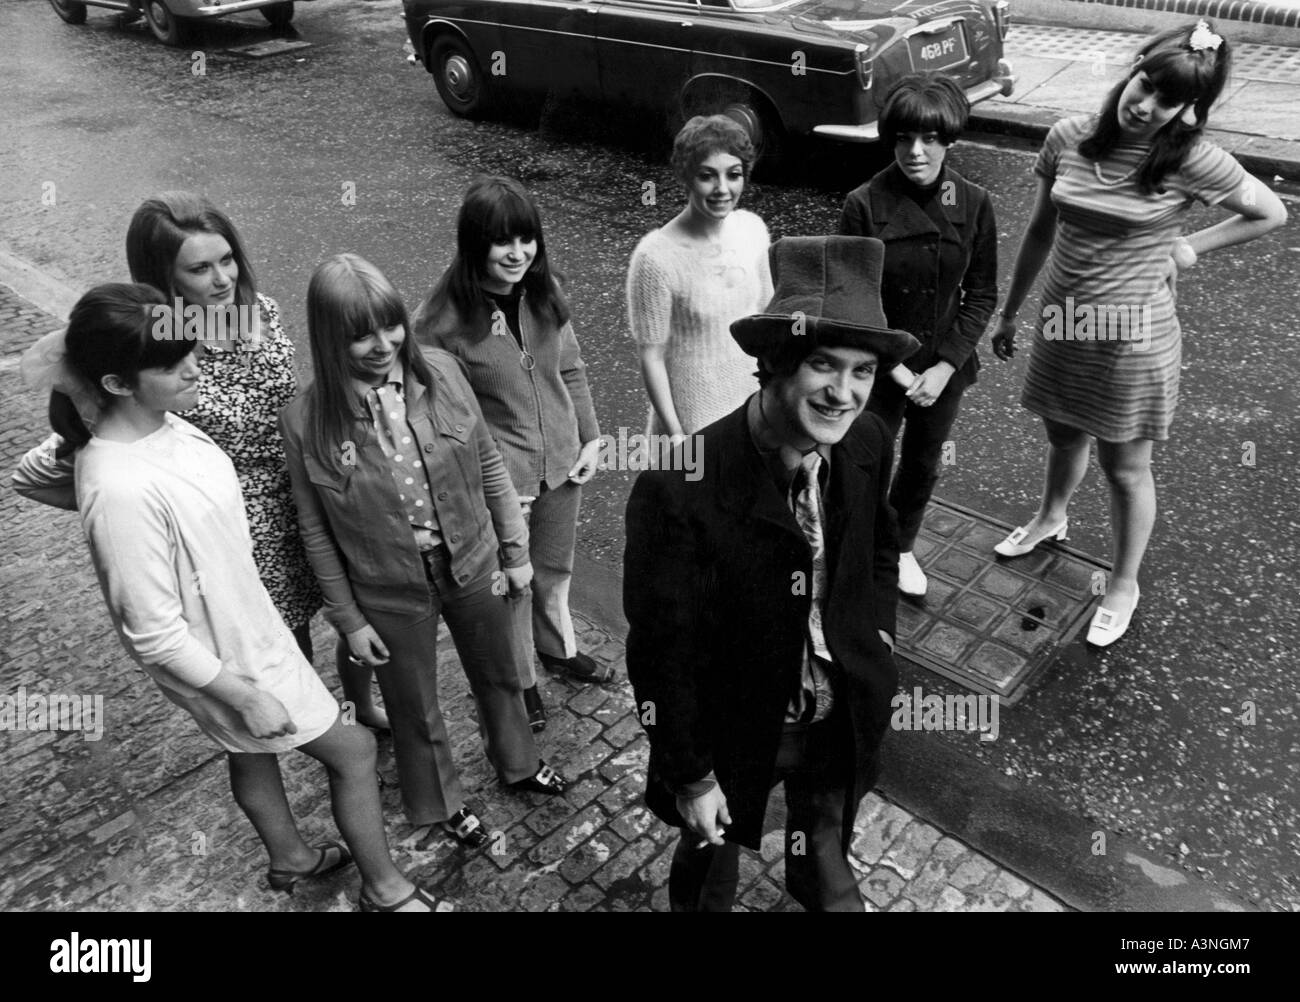 RAY DAVIES of the Kinks in May 1967 with admirers in Carnaby Street. Photo Tony Gale Stock Photo